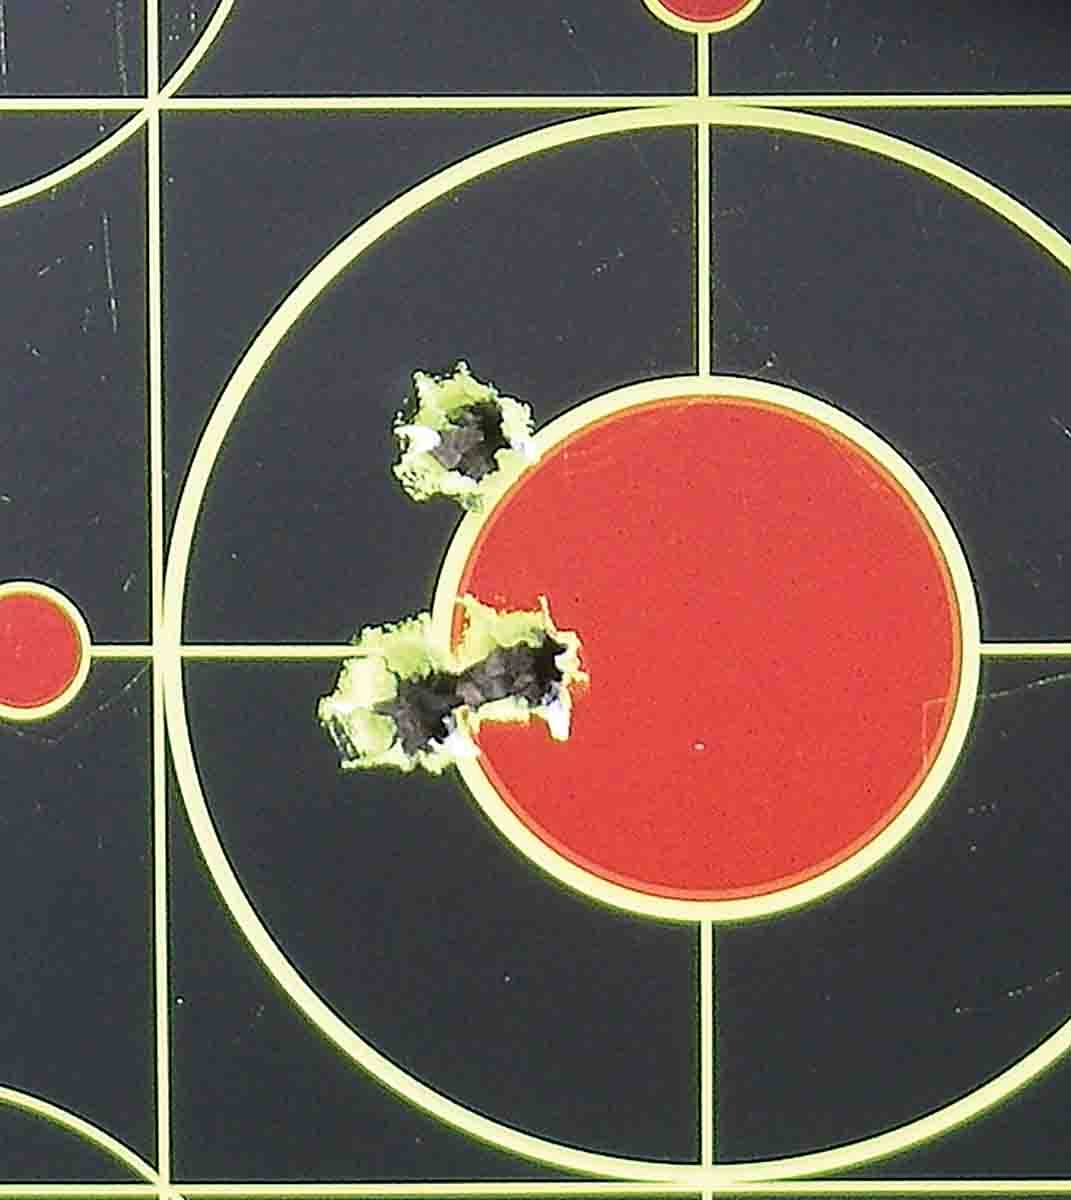 The Model 48 and .33 Nosler proved an accurate combination, with several three-shot groups hovering under .5-inch. This four-shot group was fired at 100 yards, with the upper bullet being “pulled” by the shooter.